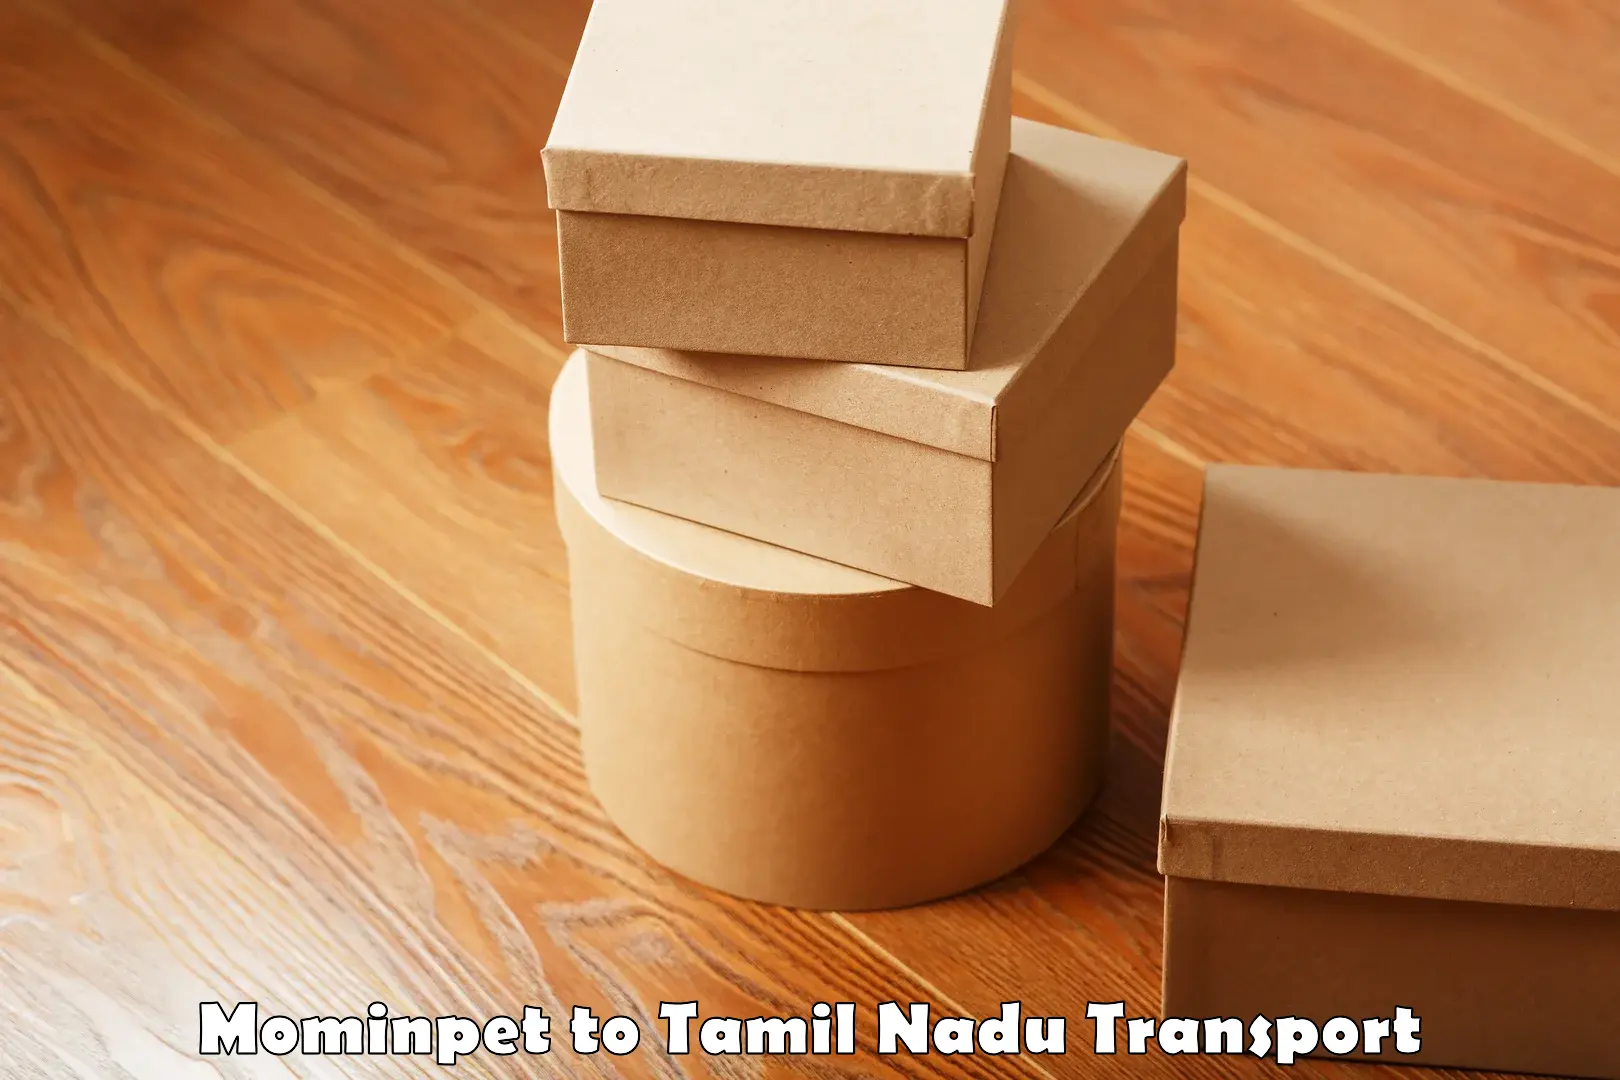 Goods delivery service Mominpet to Mylapore